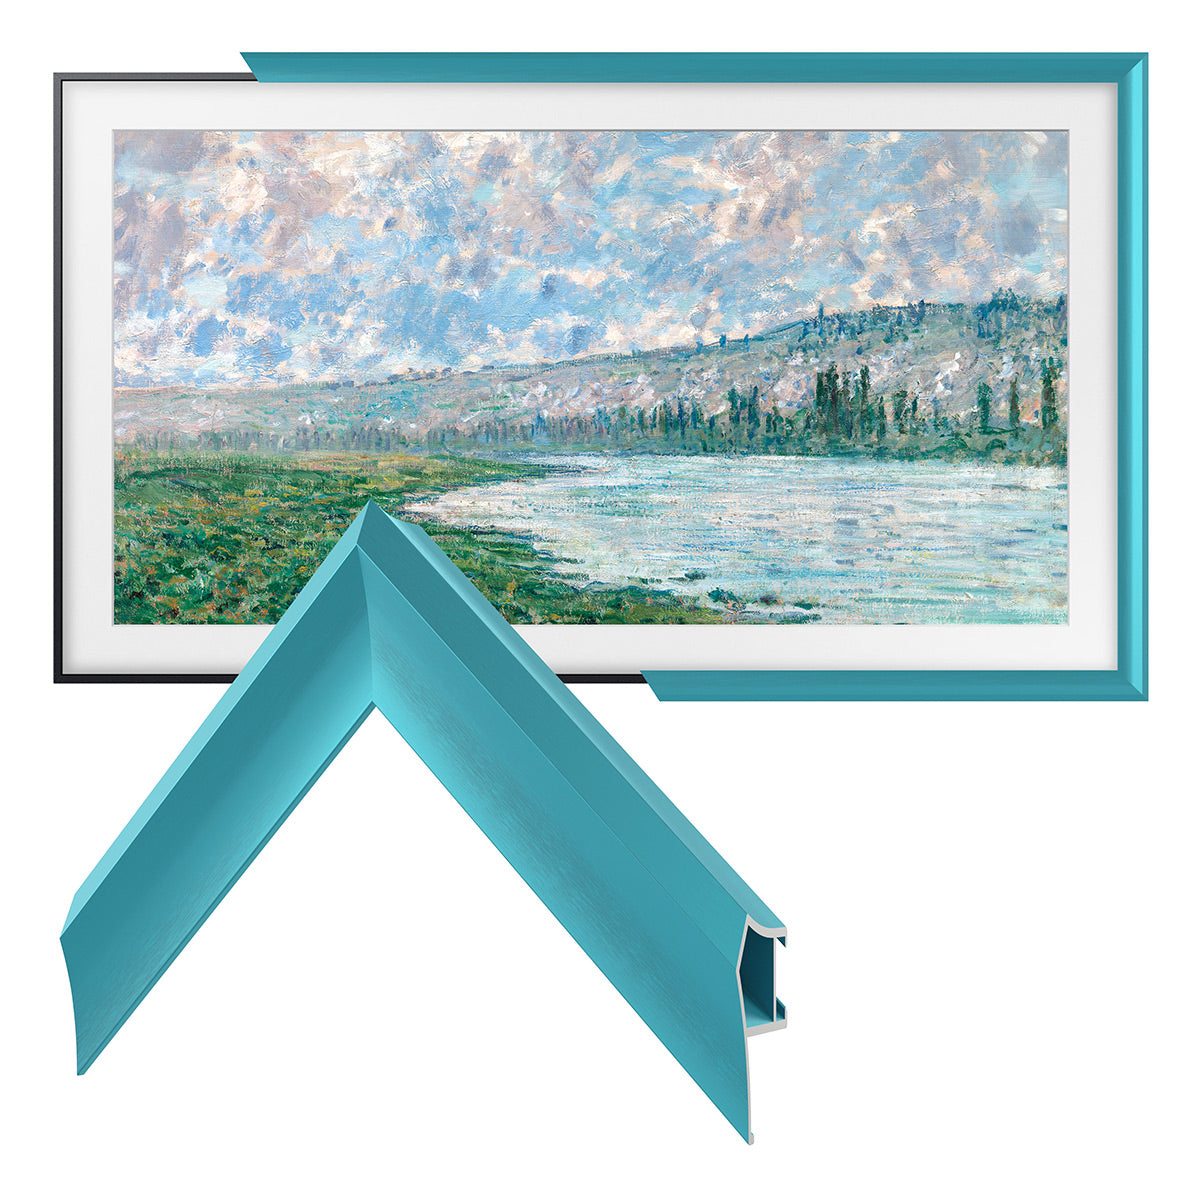 Deco TV Frames 65" Customizable Alloy Prismatic Frame for Samsung The Frame TV 2021-2024 (Turquoise)